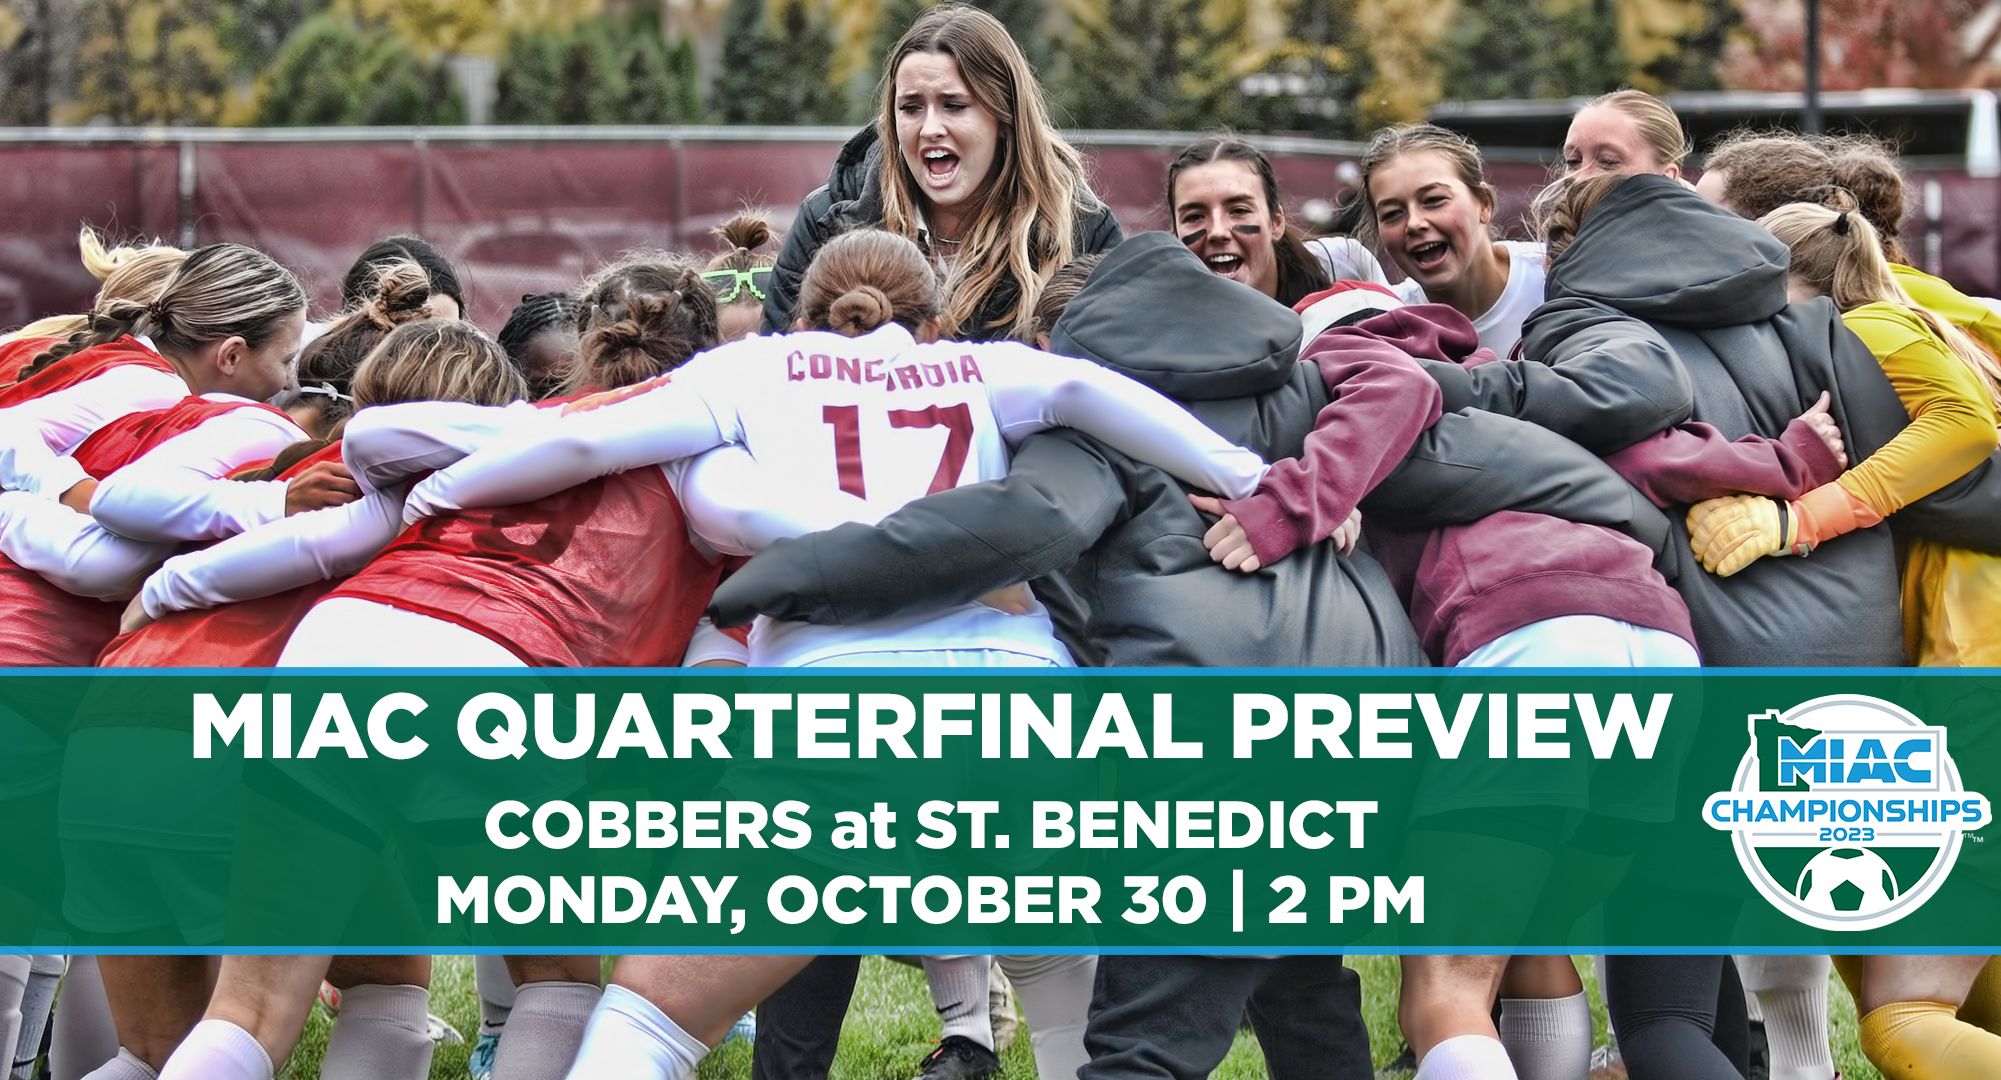 Concordia faces St. Benedict in the quarterfinals of the MIAC playoffs. It's the first playoff appearance for the Cobbers since 2015.